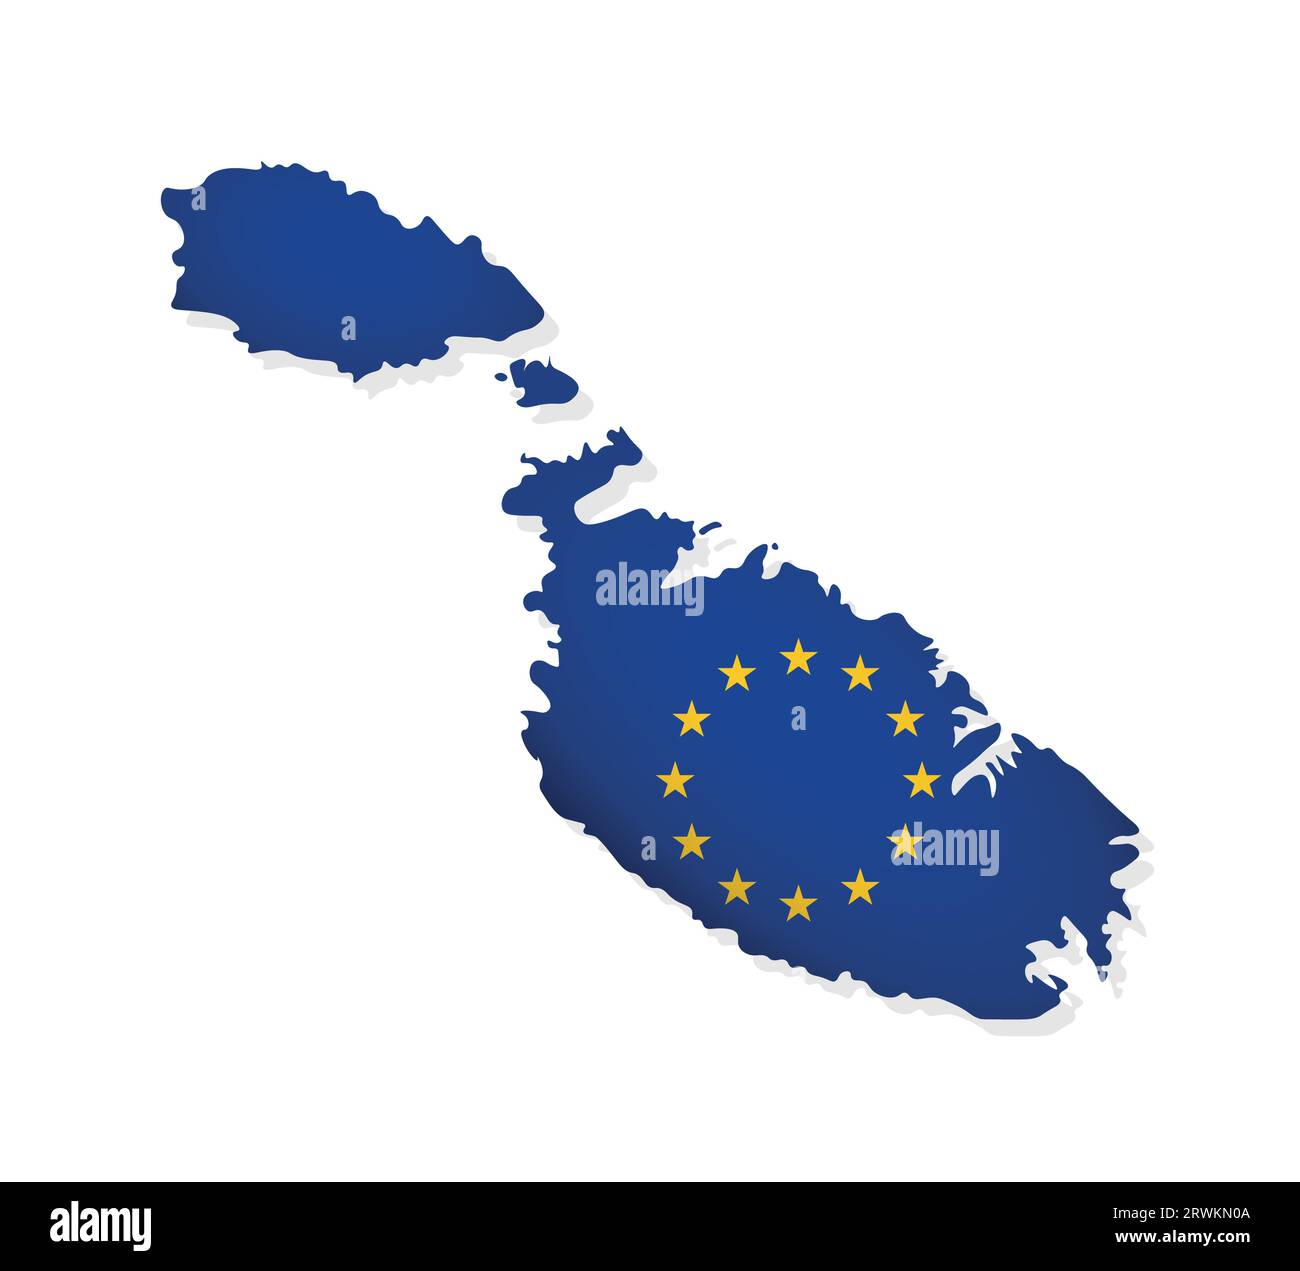 Vector illustration with isolated map of member of European Union - Malta. Maltese concept decorated by the EU flag with gold stars on blue background Stock Vector